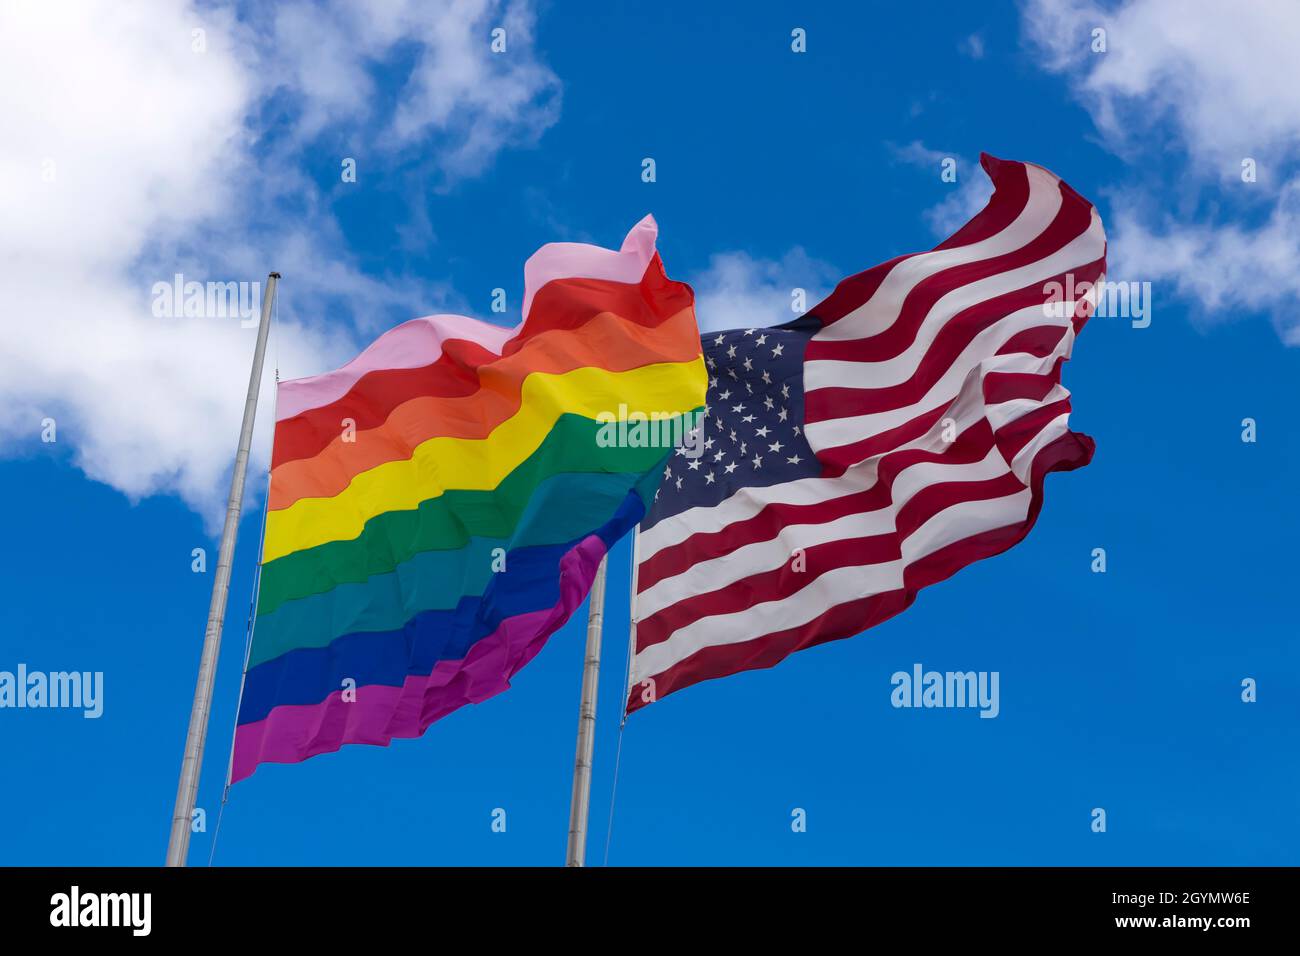 Rainbow flag/gay pride flag (LGBT) flying next to American flag on Cherry Grove, Fire Island, New York, United States of America. Stock Photo